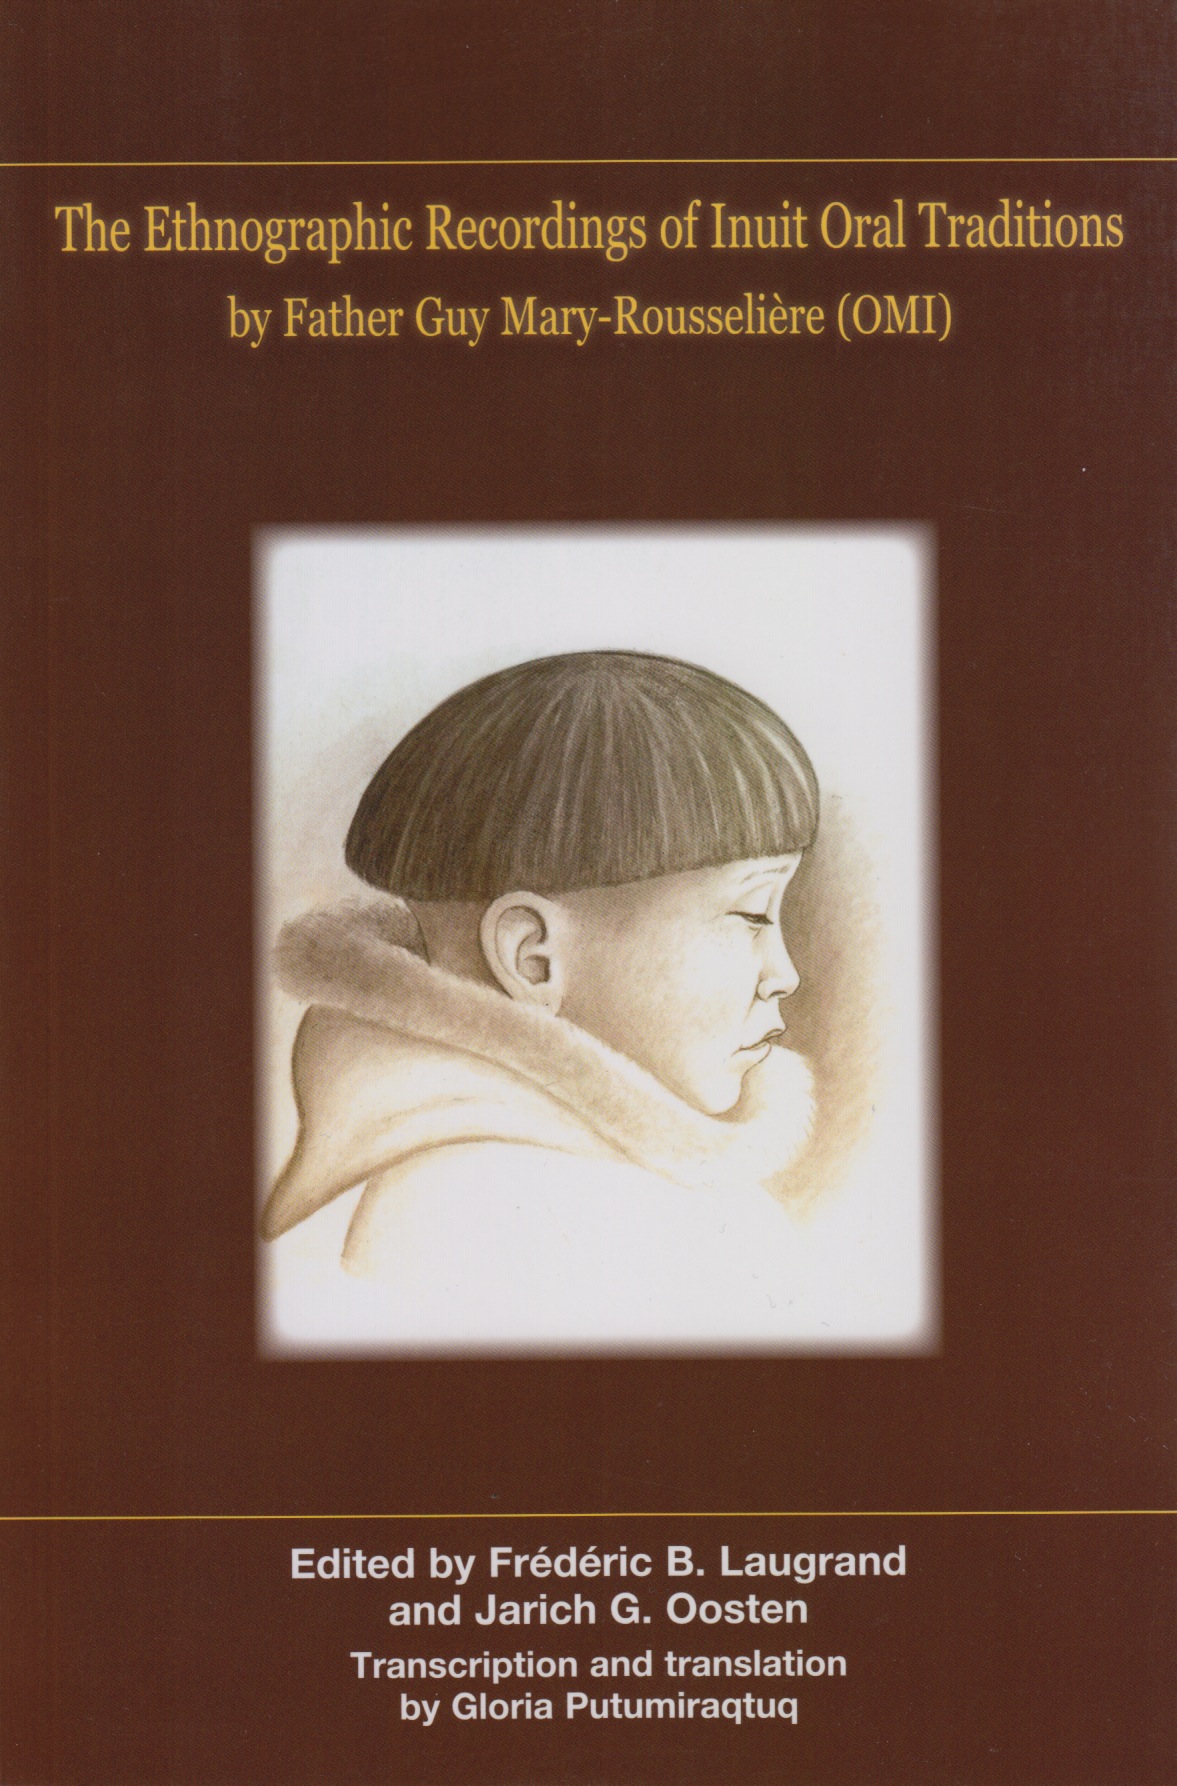 Ethnographic Recordings of Inuit Oral Traditions by Father Guy Mary-Rousseli?re